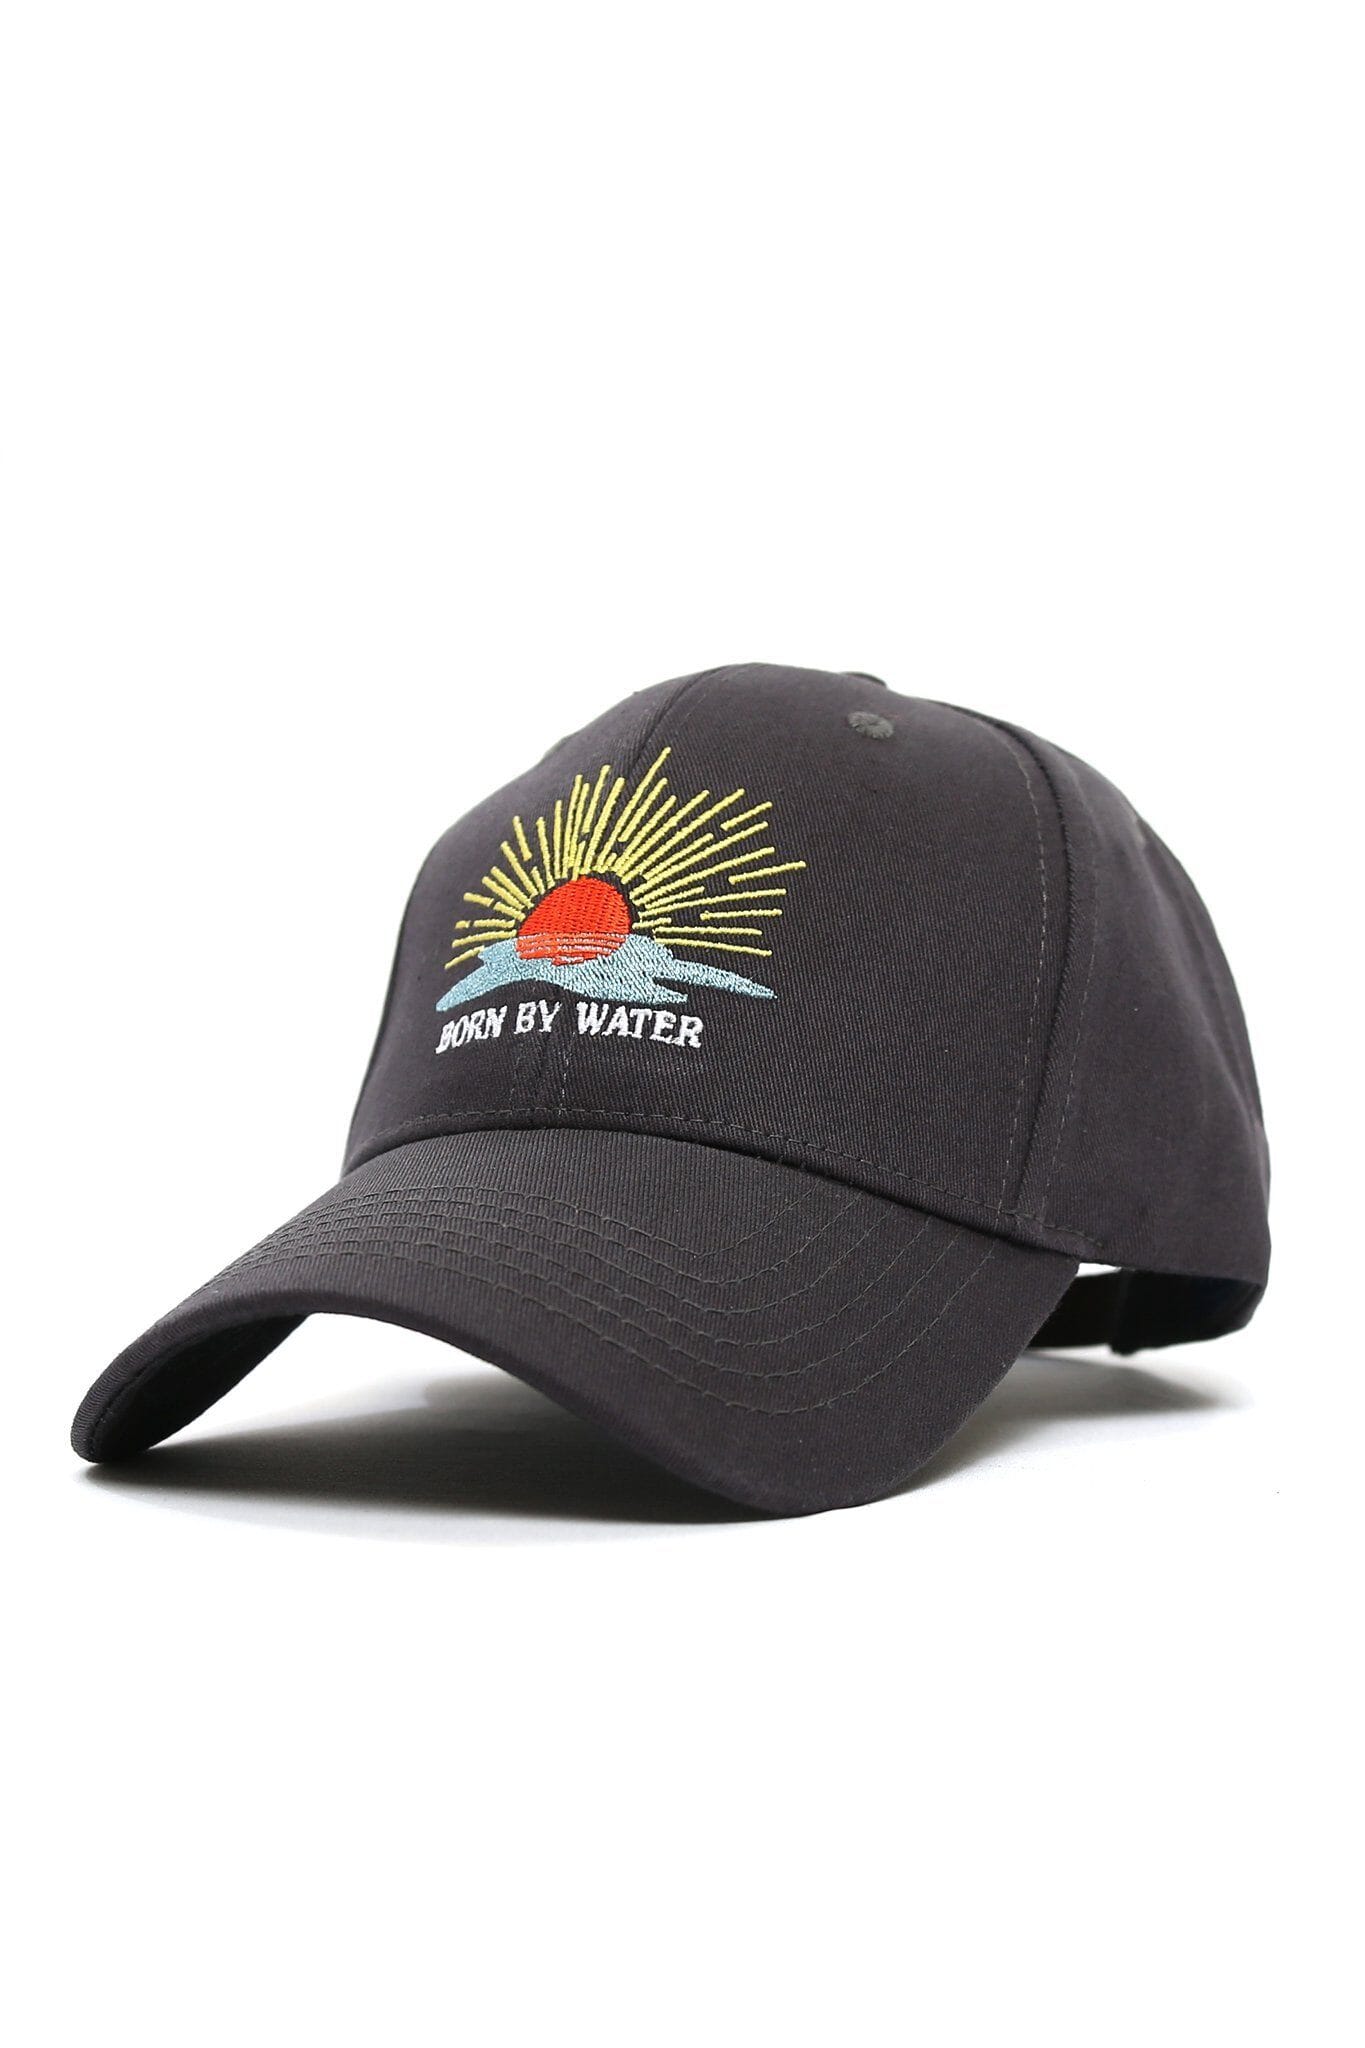 BORN BY WATER SUNSET CAP